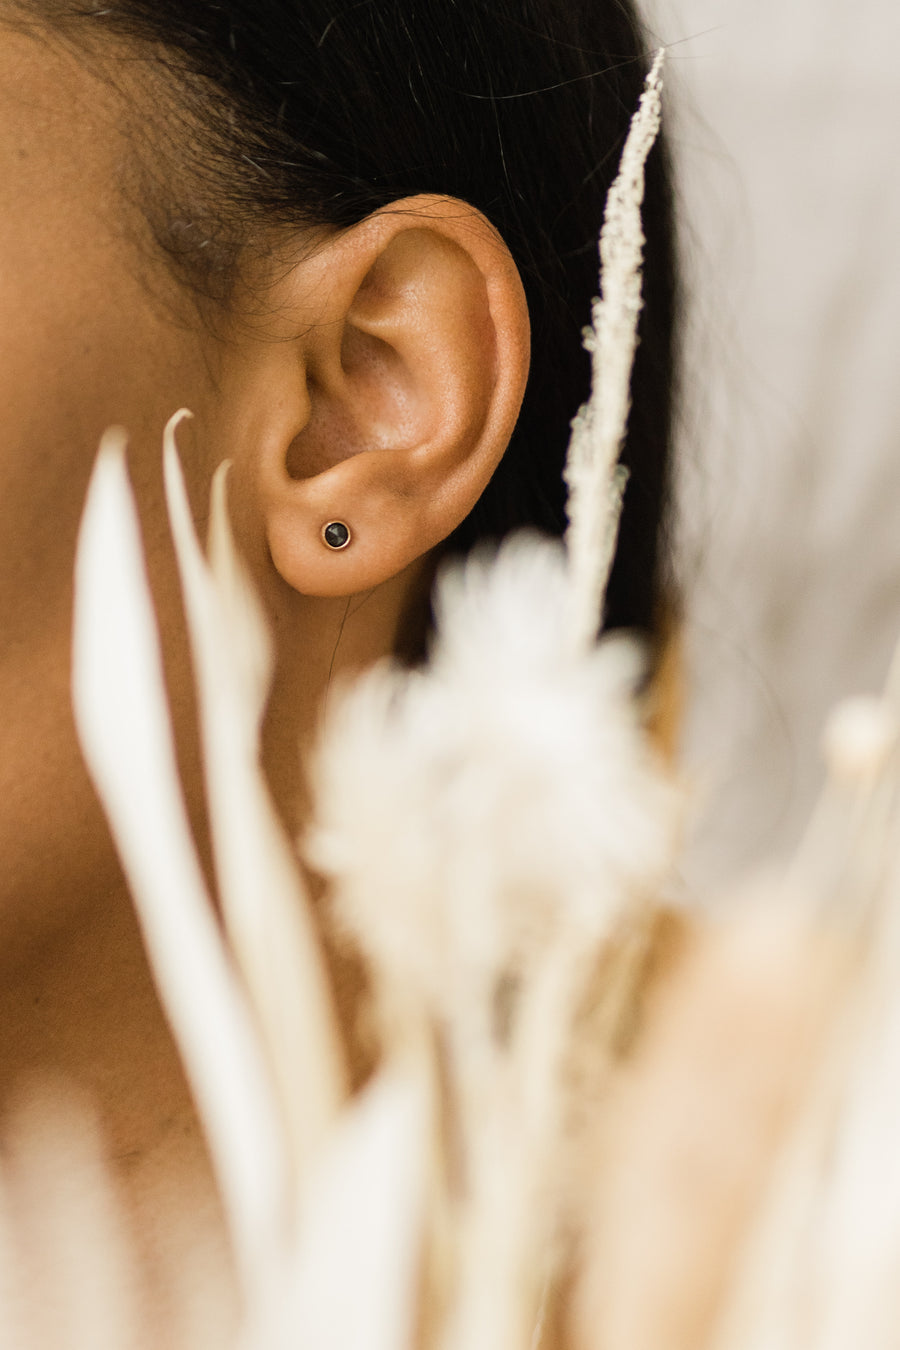 Black Diamond Stud Earrings in Solid Gold by Feathers And Wings. Fine Jewellery by Jane Bannor